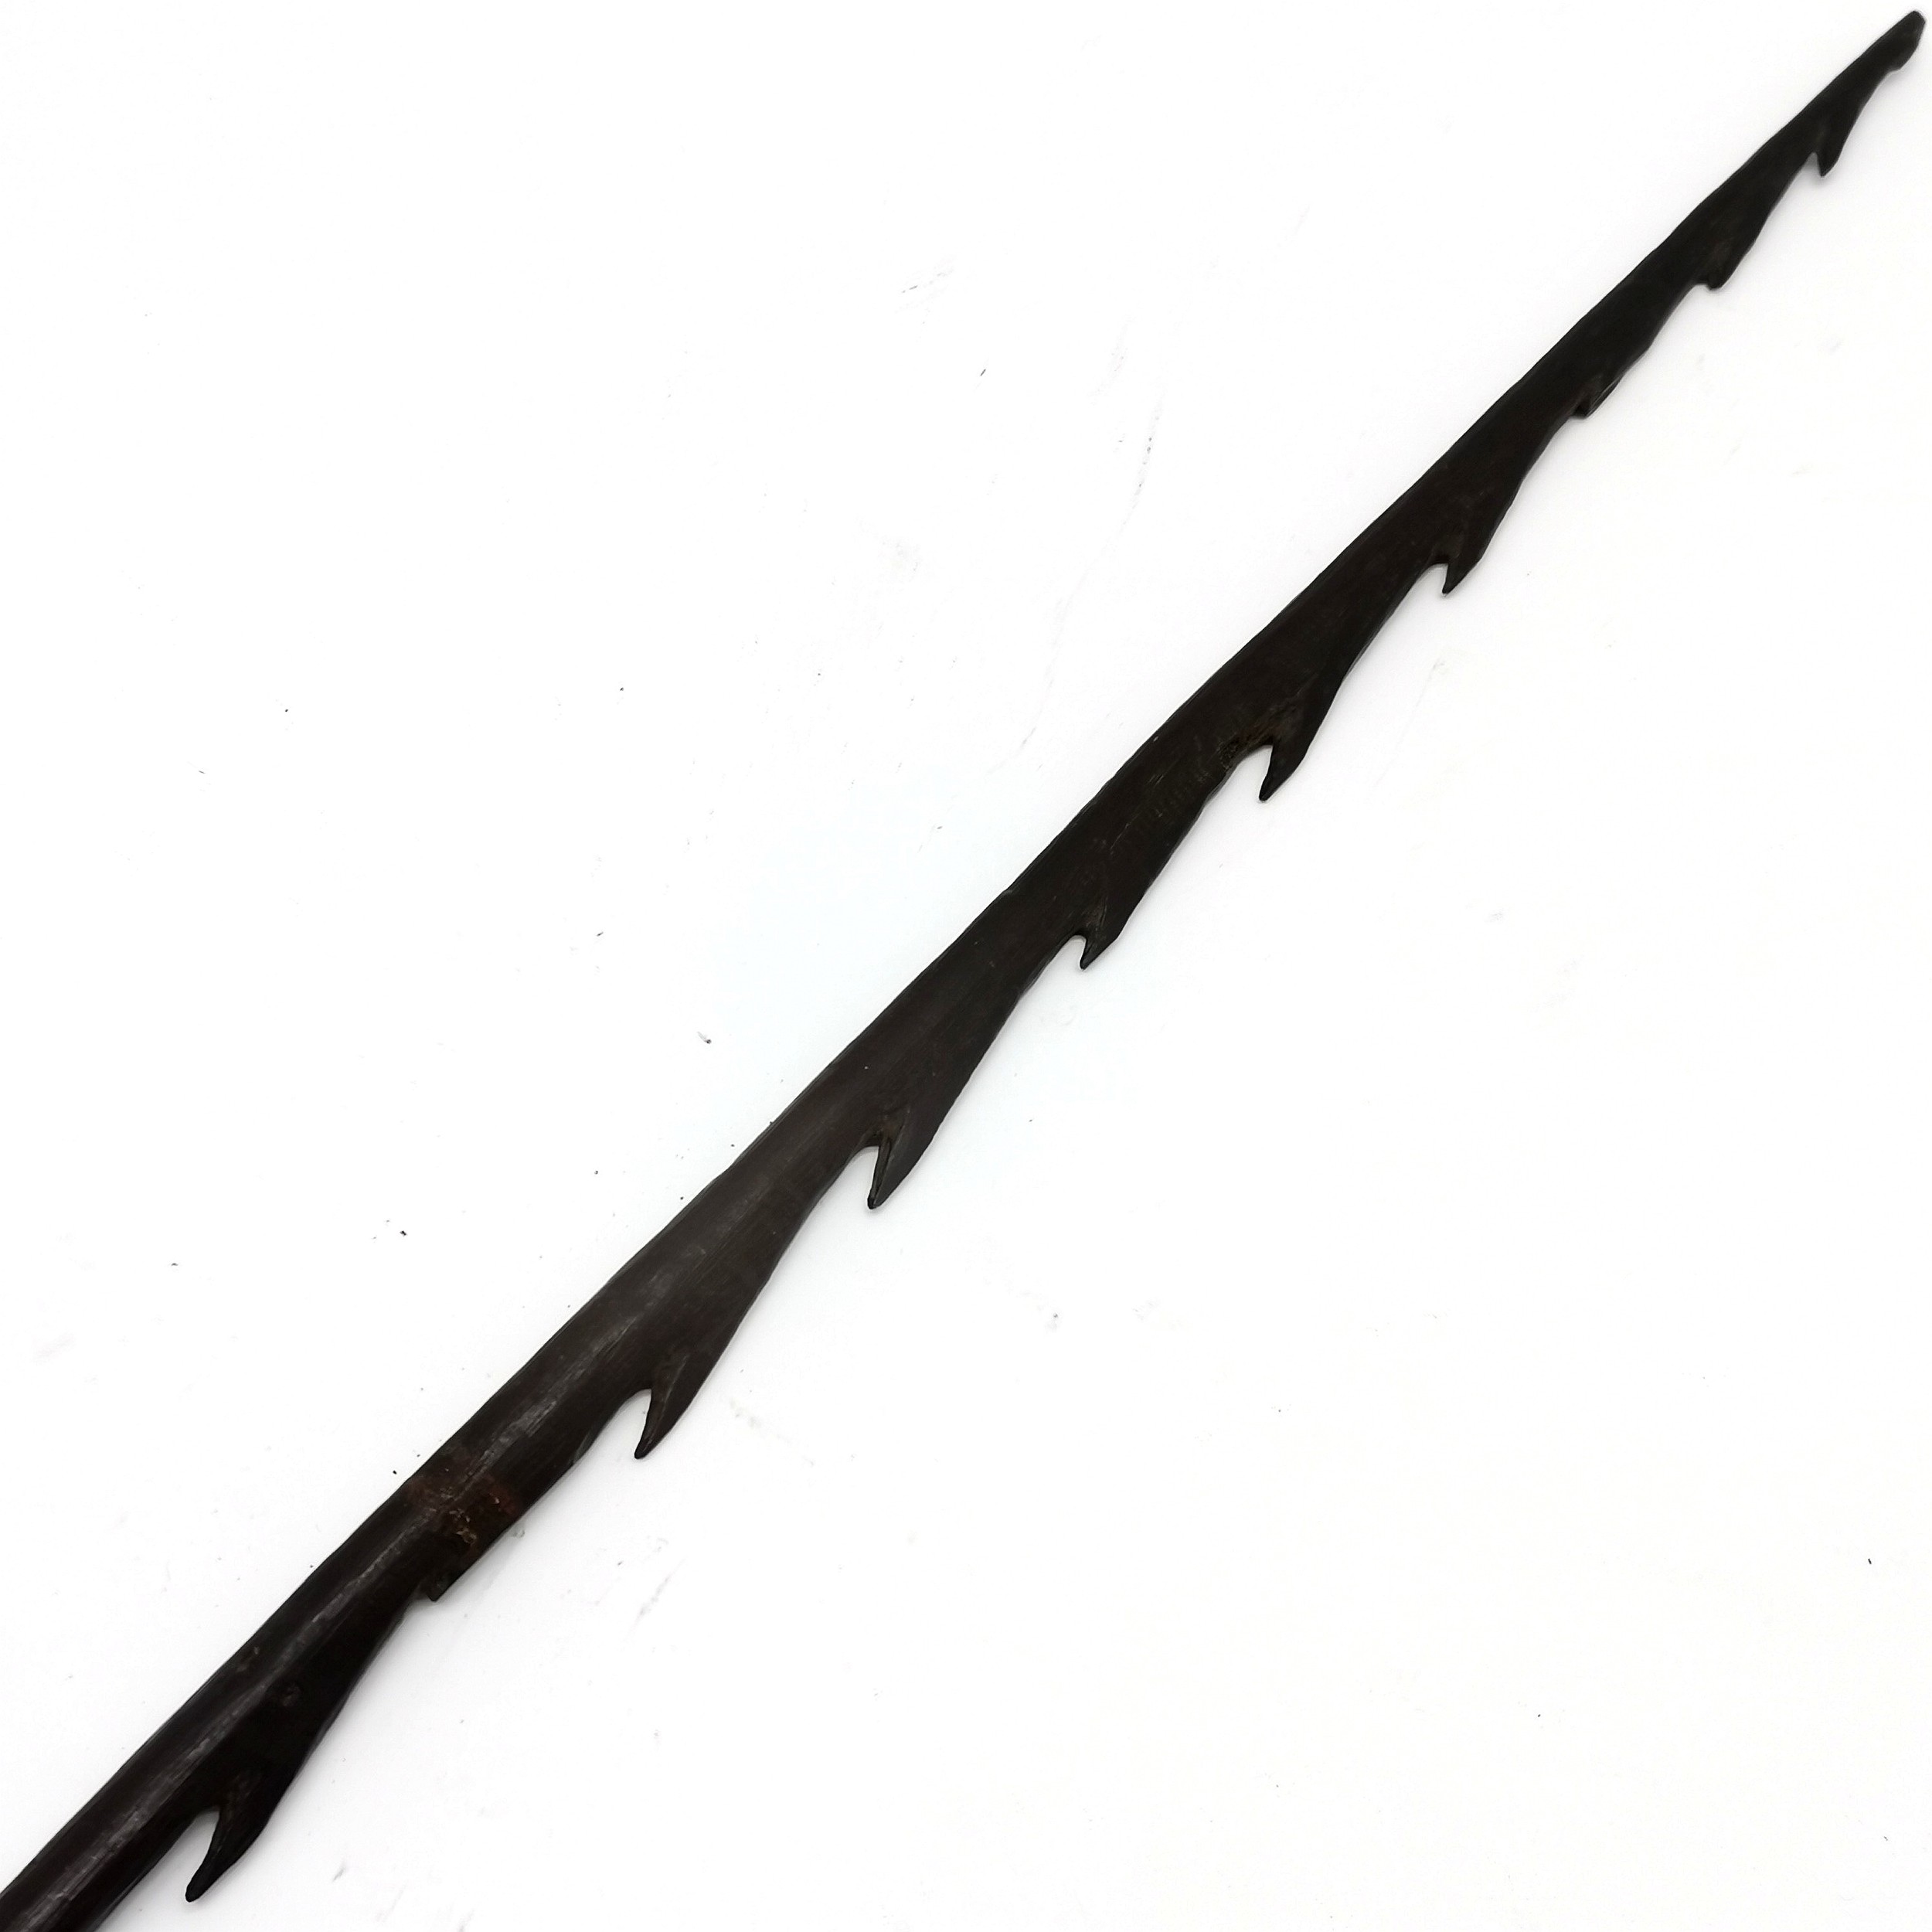 Antique ethnic wooden fishing spear with barbed detail - has losses - 92cm long. - Image 2 of 3